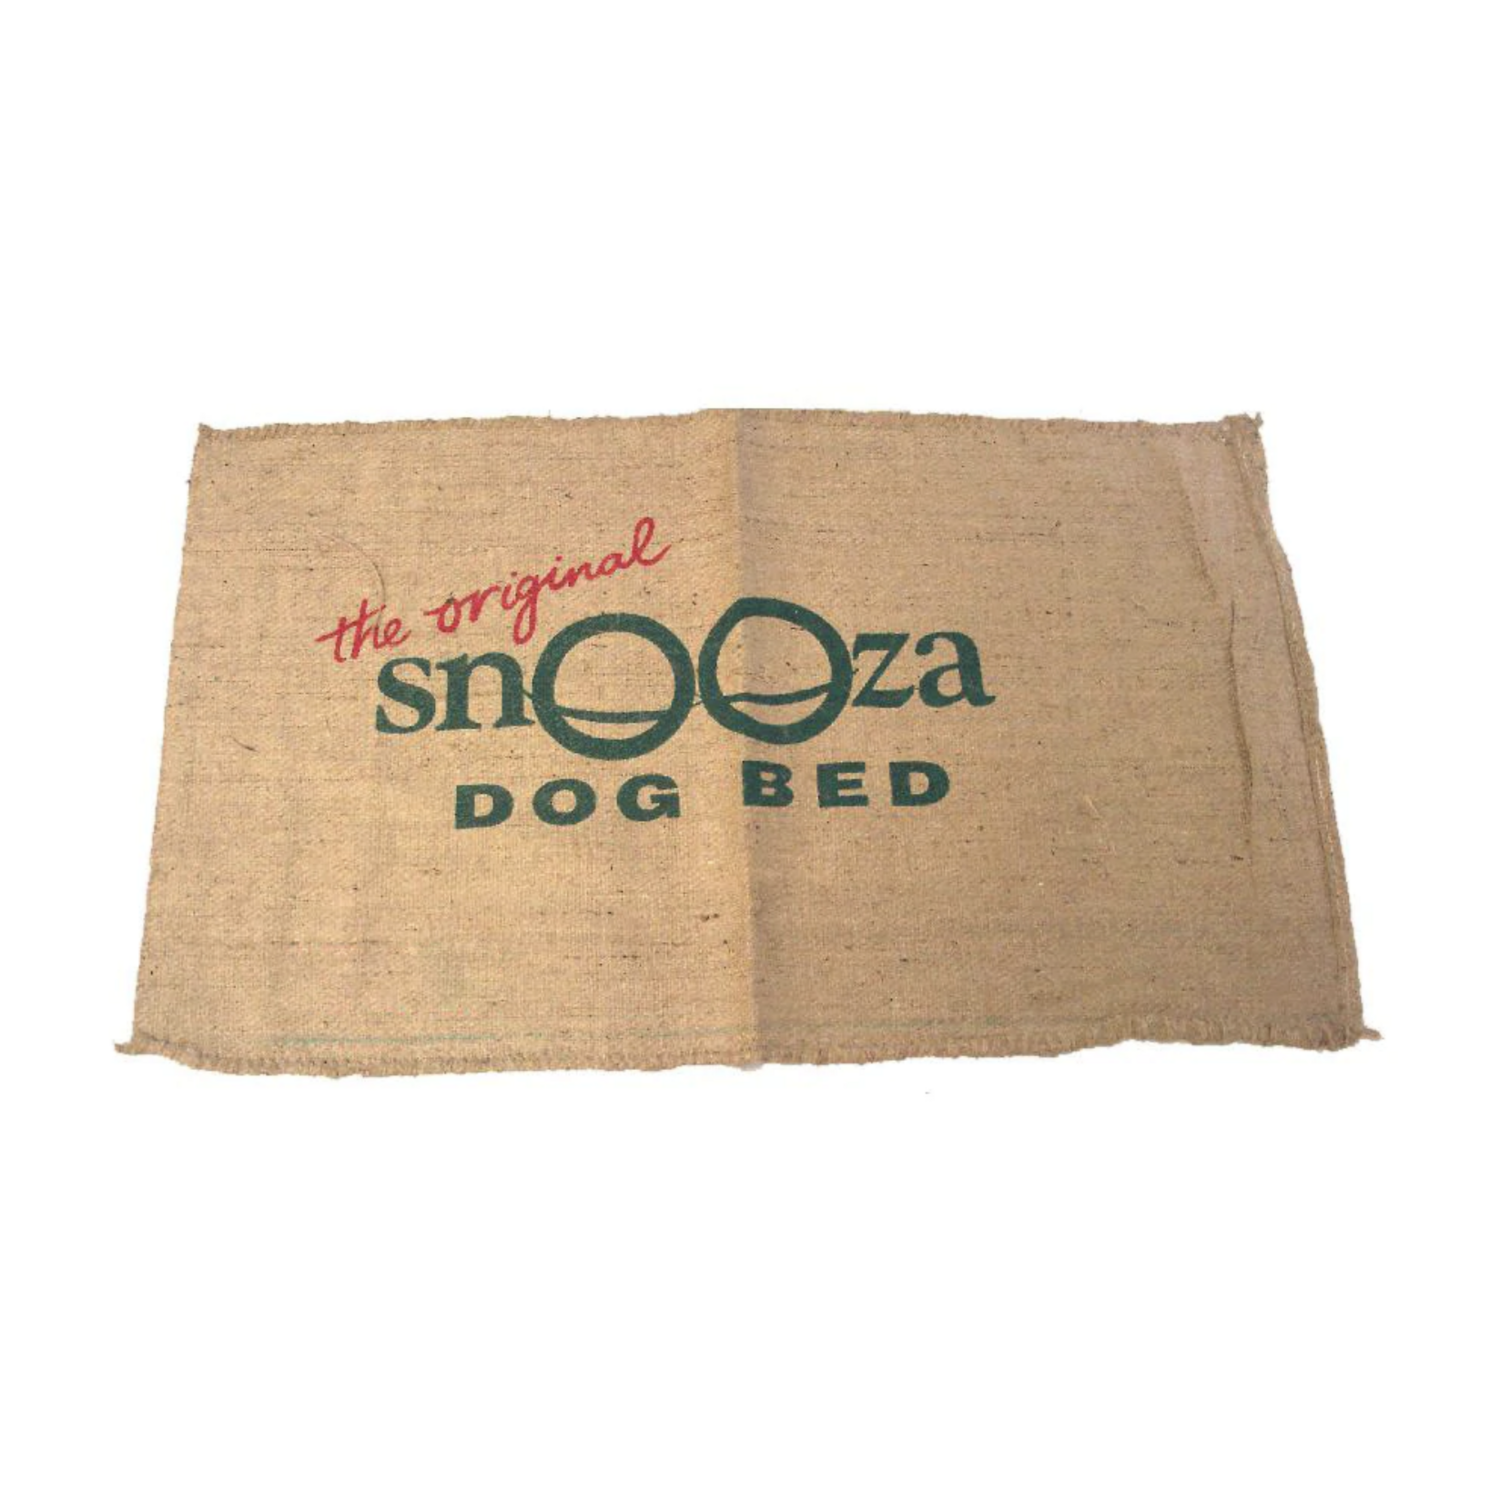 The Original Snooza Dog Bed Covers - LARGE